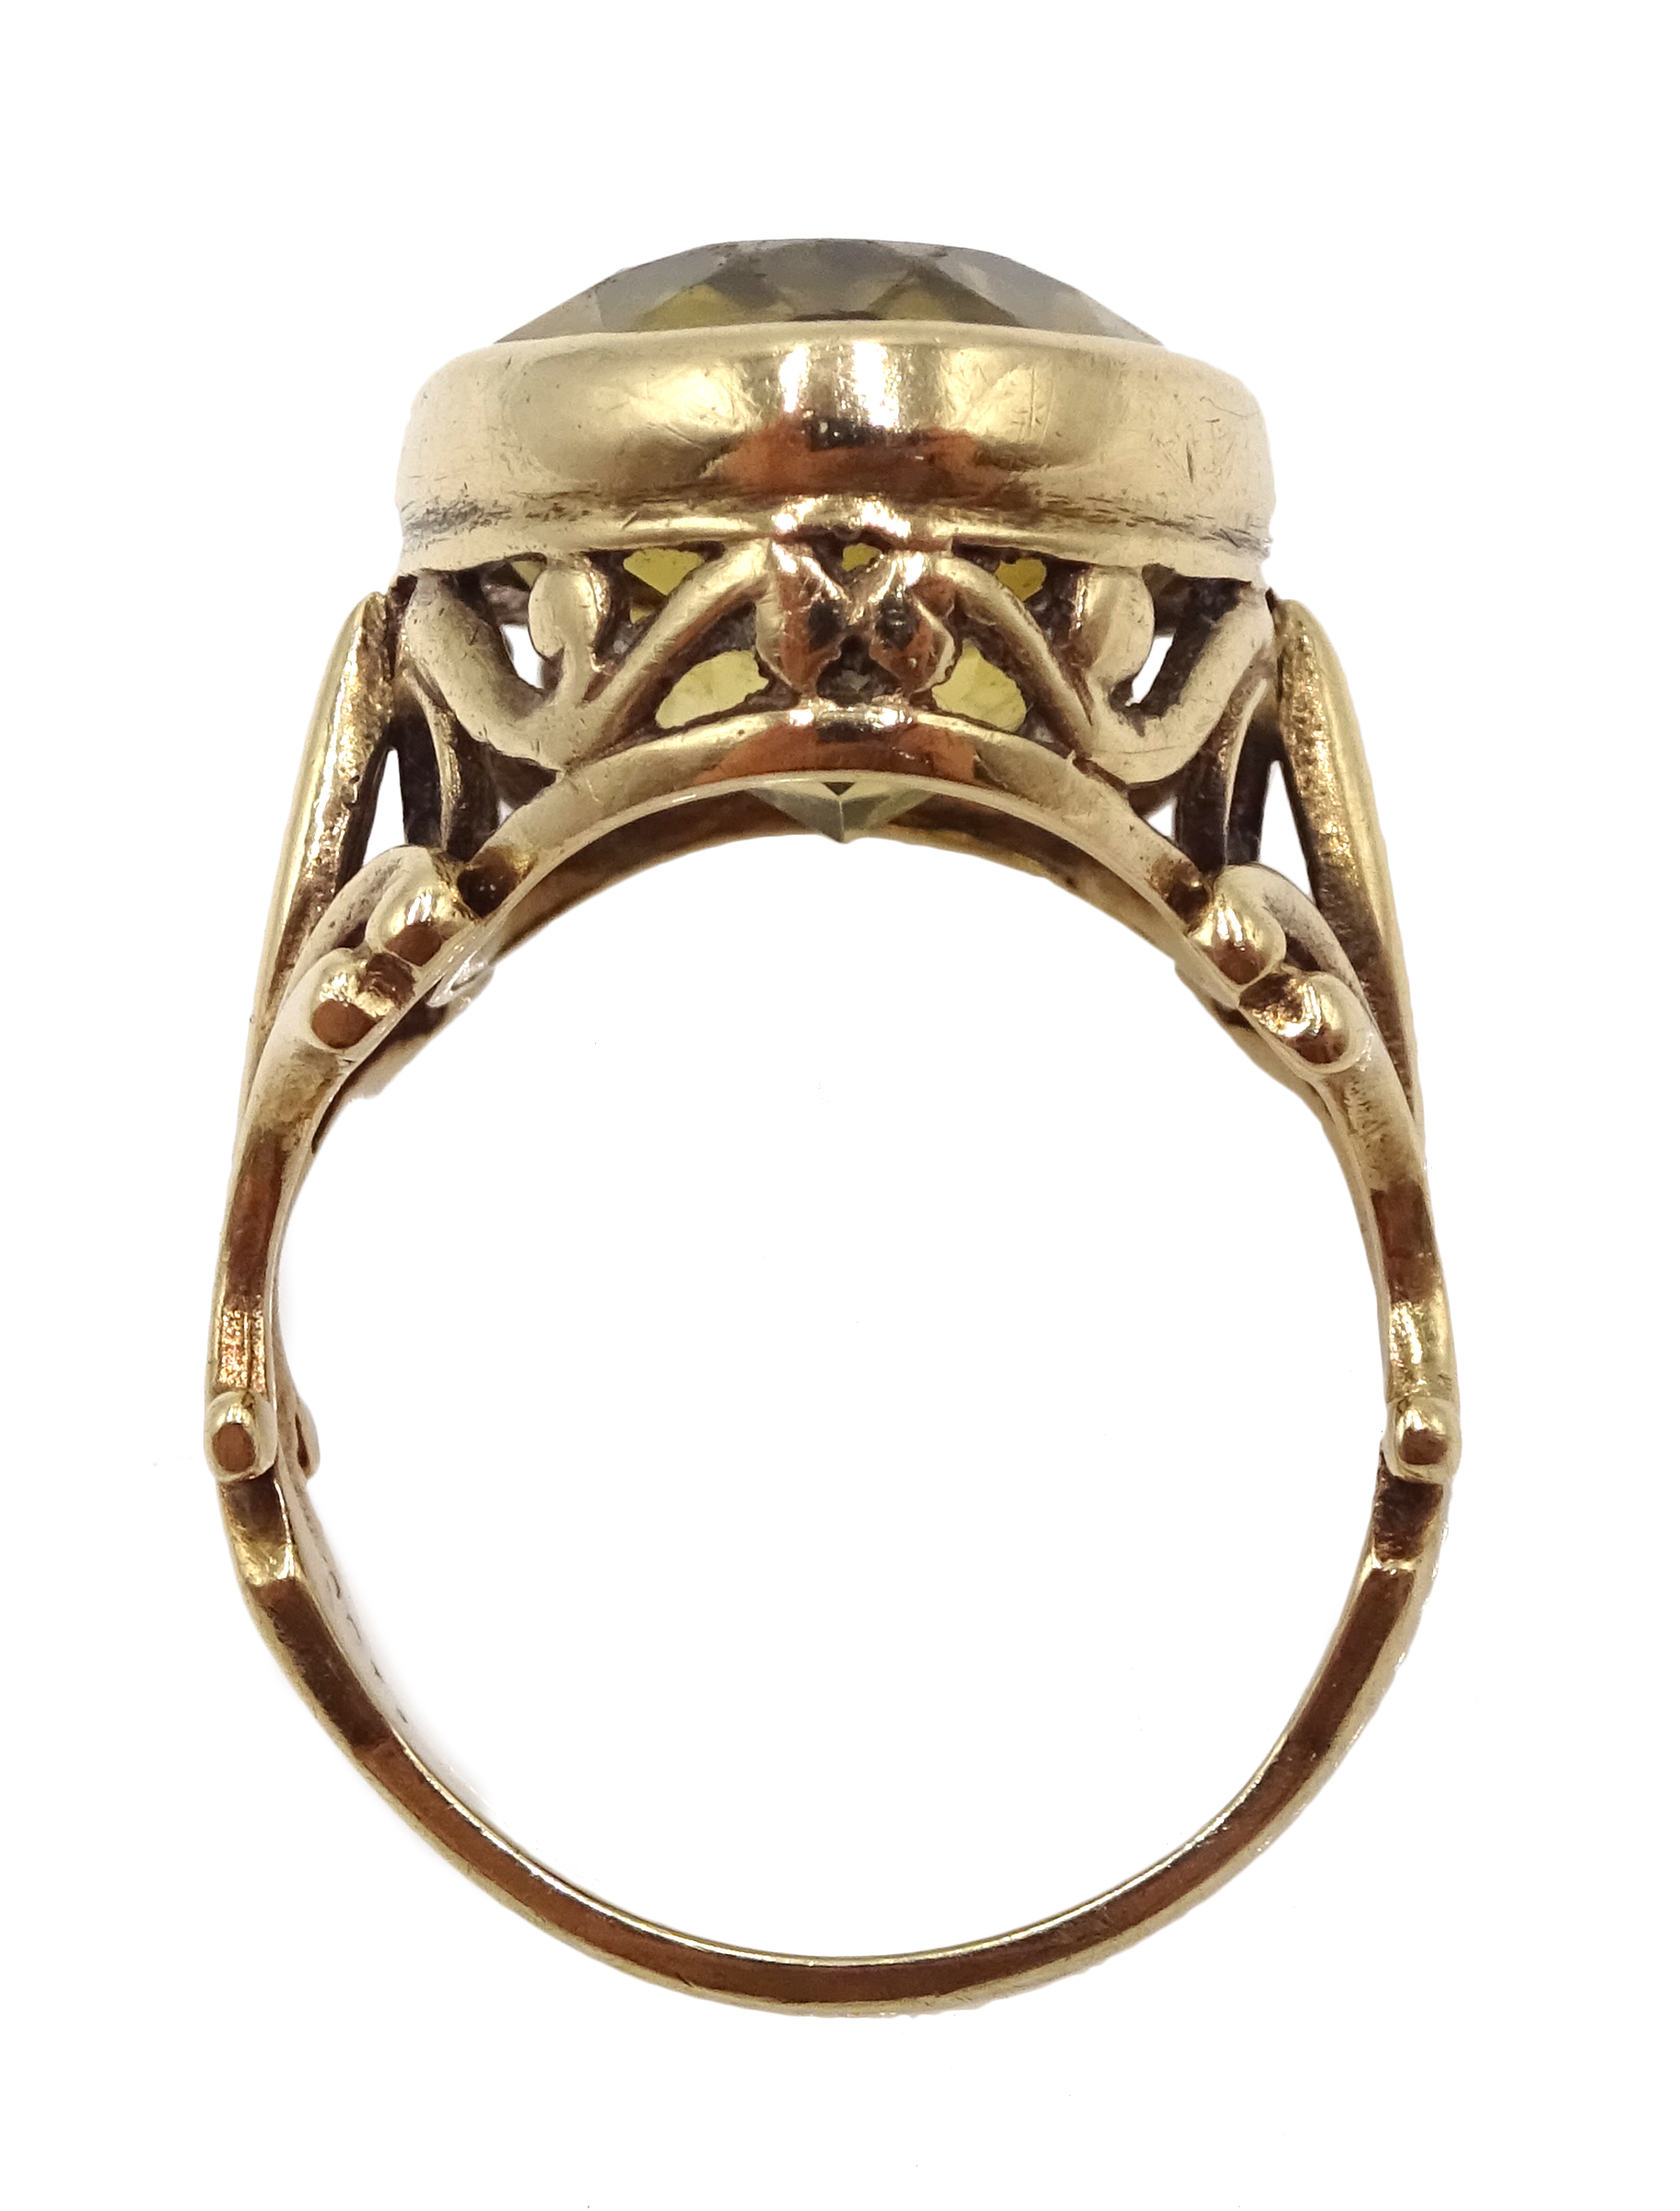 Rose gold oval citrine ring, with open work gallery, - Image 3 of 3